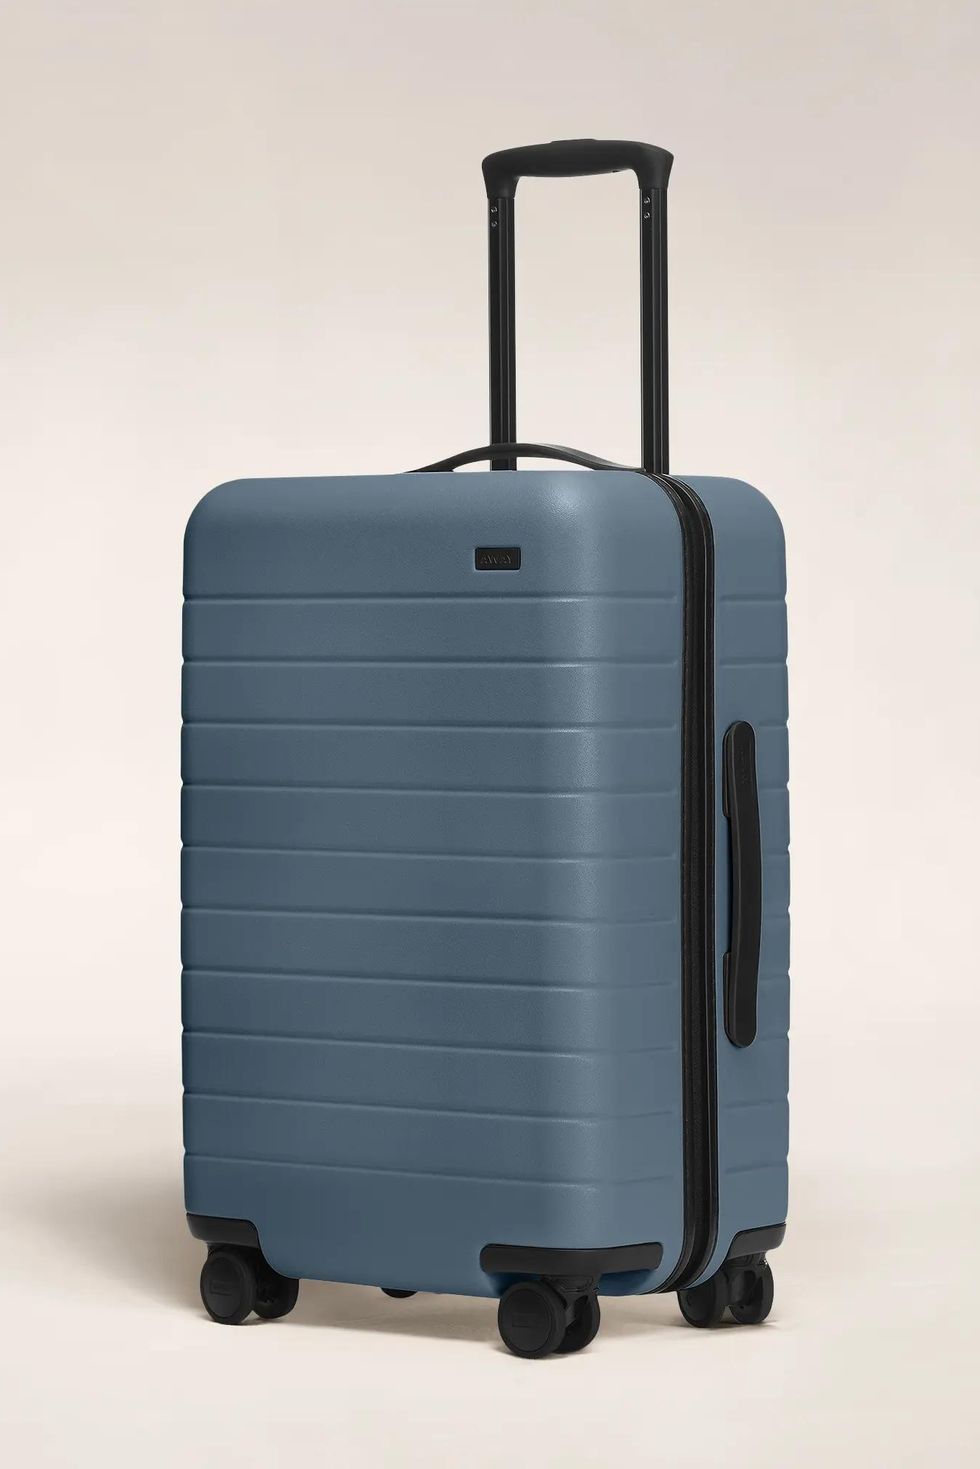 Best Luggage Accessories: Personalize Your Suitcase to Avoid Losing It